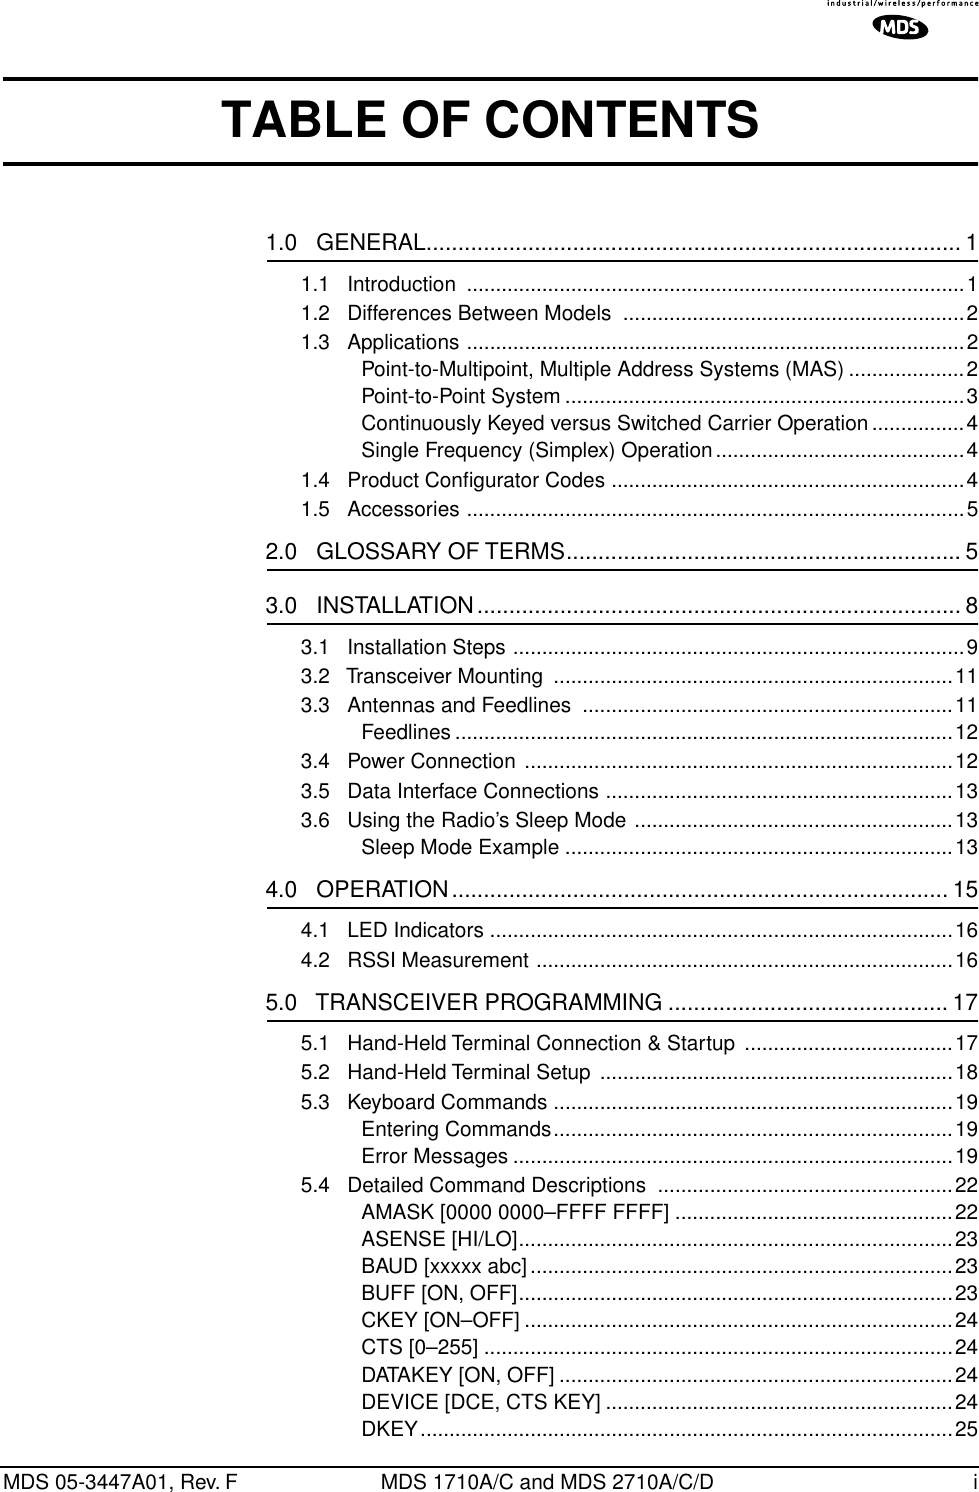  MDS 05-3447A01, Rev. F MDS 1710A/C and MDS 2710A/C/D i TABLE OF CONTENTS 1.0   GENERAL.................................................................................... 1 1.1   Introduction  ......................................................................................11.2   Differences Between Models  ...........................................................21.3   Applications ......................................................................................2Point-to-Multipoint, Multiple Address Systems (MAS) ....................2Point-to-Point System .....................................................................3Continuously Keyed versus Switched Carrier Operation................4Single Frequency (Simplex) Operation...........................................41.4   Product Conﬁgurator Codes .............................................................41.5   Accessories ......................................................................................5 2.0   GLOSSARY OF TERMS.............................................................. 5 3.0   INSTALLATION............................................................................ 8 3.1   Installation Steps ..............................................................................93.2   Transceiver Mounting  .....................................................................113.3   Antennas and Feedlines  ................................................................11Feedlines ......................................................................................123.4   Power Connection ..........................................................................123.5   Data Interface Connections ............................................................133.6   Using the Radio’s Sleep Mode .......................................................13Sleep Mode Example ...................................................................13 4.0   OPERATION.............................................................................. 15 4.1   LED Indicators ................................................................................164.2   RSSI Measurement ........................................................................16 5.0   TRANSCEIVER PROGRAMMING ............................................ 17 5.1   Hand-Held Terminal Connection &amp; Startup  ....................................175.2   Hand-Held Terminal Setup .............................................................185.3   Keyboard Commands .....................................................................19Entering Commands.....................................................................19Error Messages ............................................................................195.4   Detailed Command Descriptions  ...................................................22AMASK [0000 0000–FFFF FFFF] ................................................22ASENSE [HI/LO]...........................................................................23BAUD [xxxxx abc] .........................................................................23BUFF [ON, OFF]...........................................................................23CKEY [ON–OFF] ..........................................................................24CTS [0–255] .................................................................................24DATAKEY [ON, OFF] ....................................................................24DEVICE [DCE, CTS KEY] ............................................................24DKEY............................................................................................25